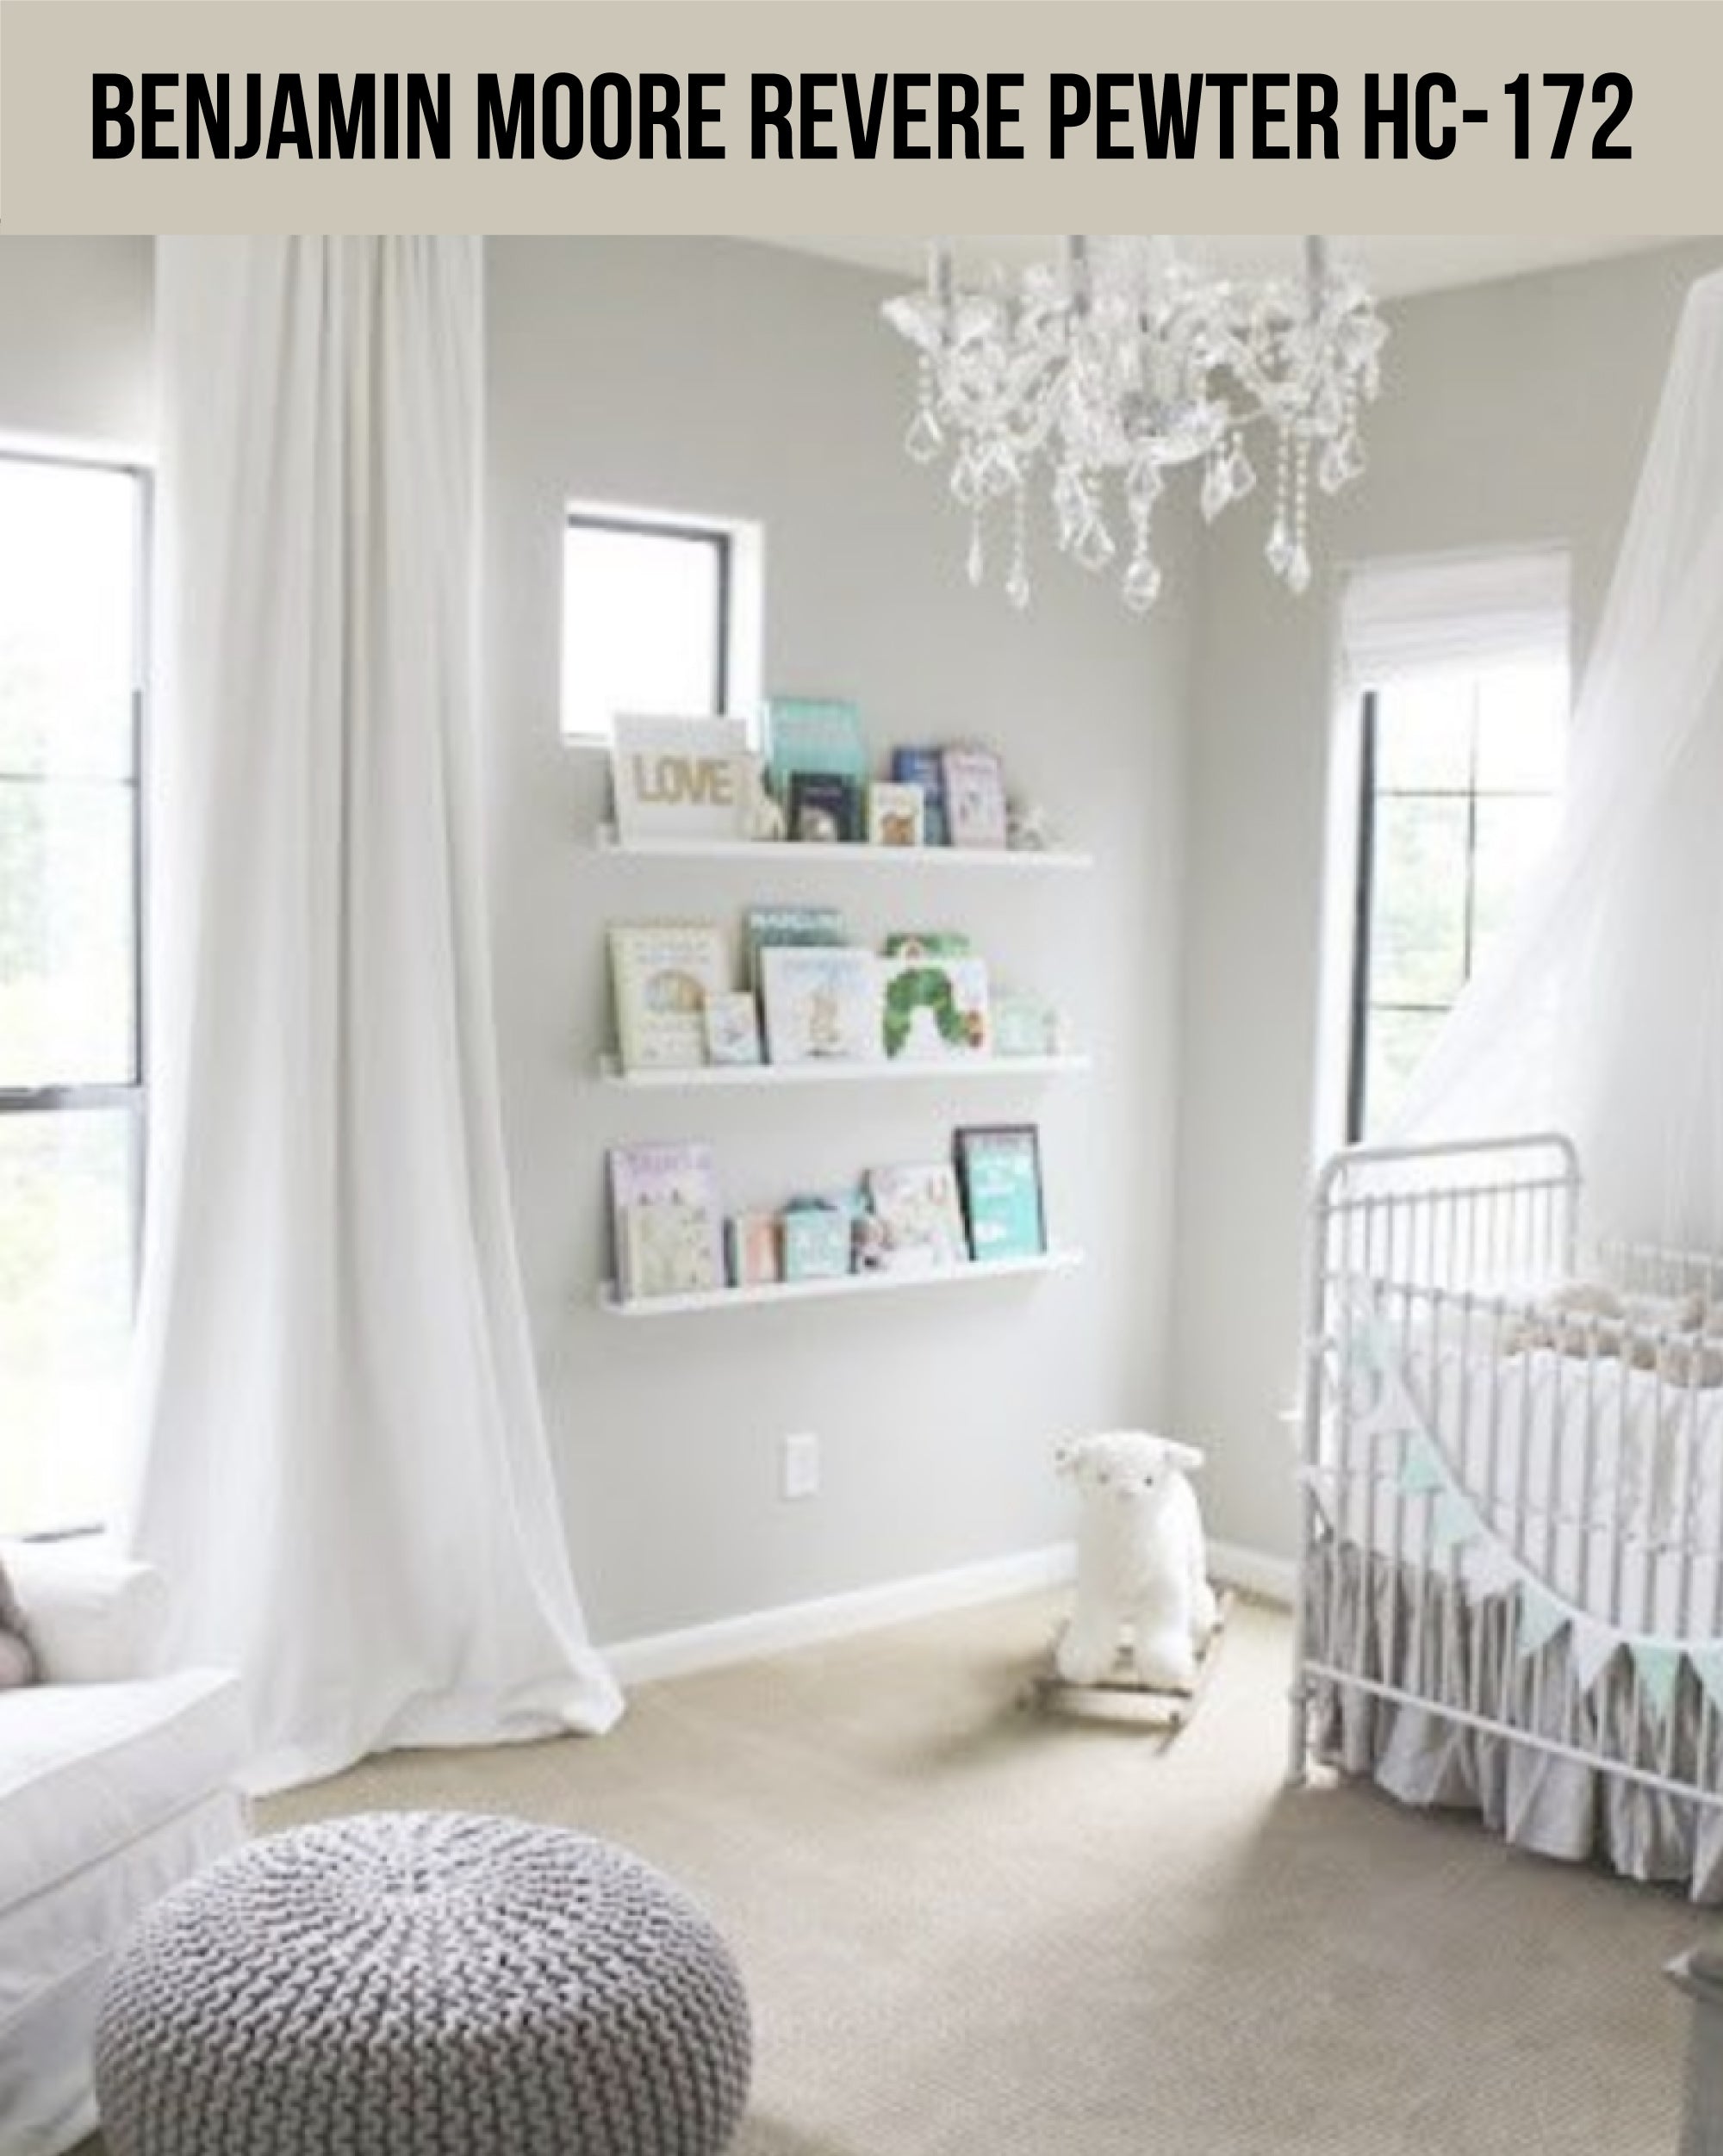 A room with a crib and a chandelier and with Revere Pewter wall color (Benjamin Moore Revere Pewter HC-172)